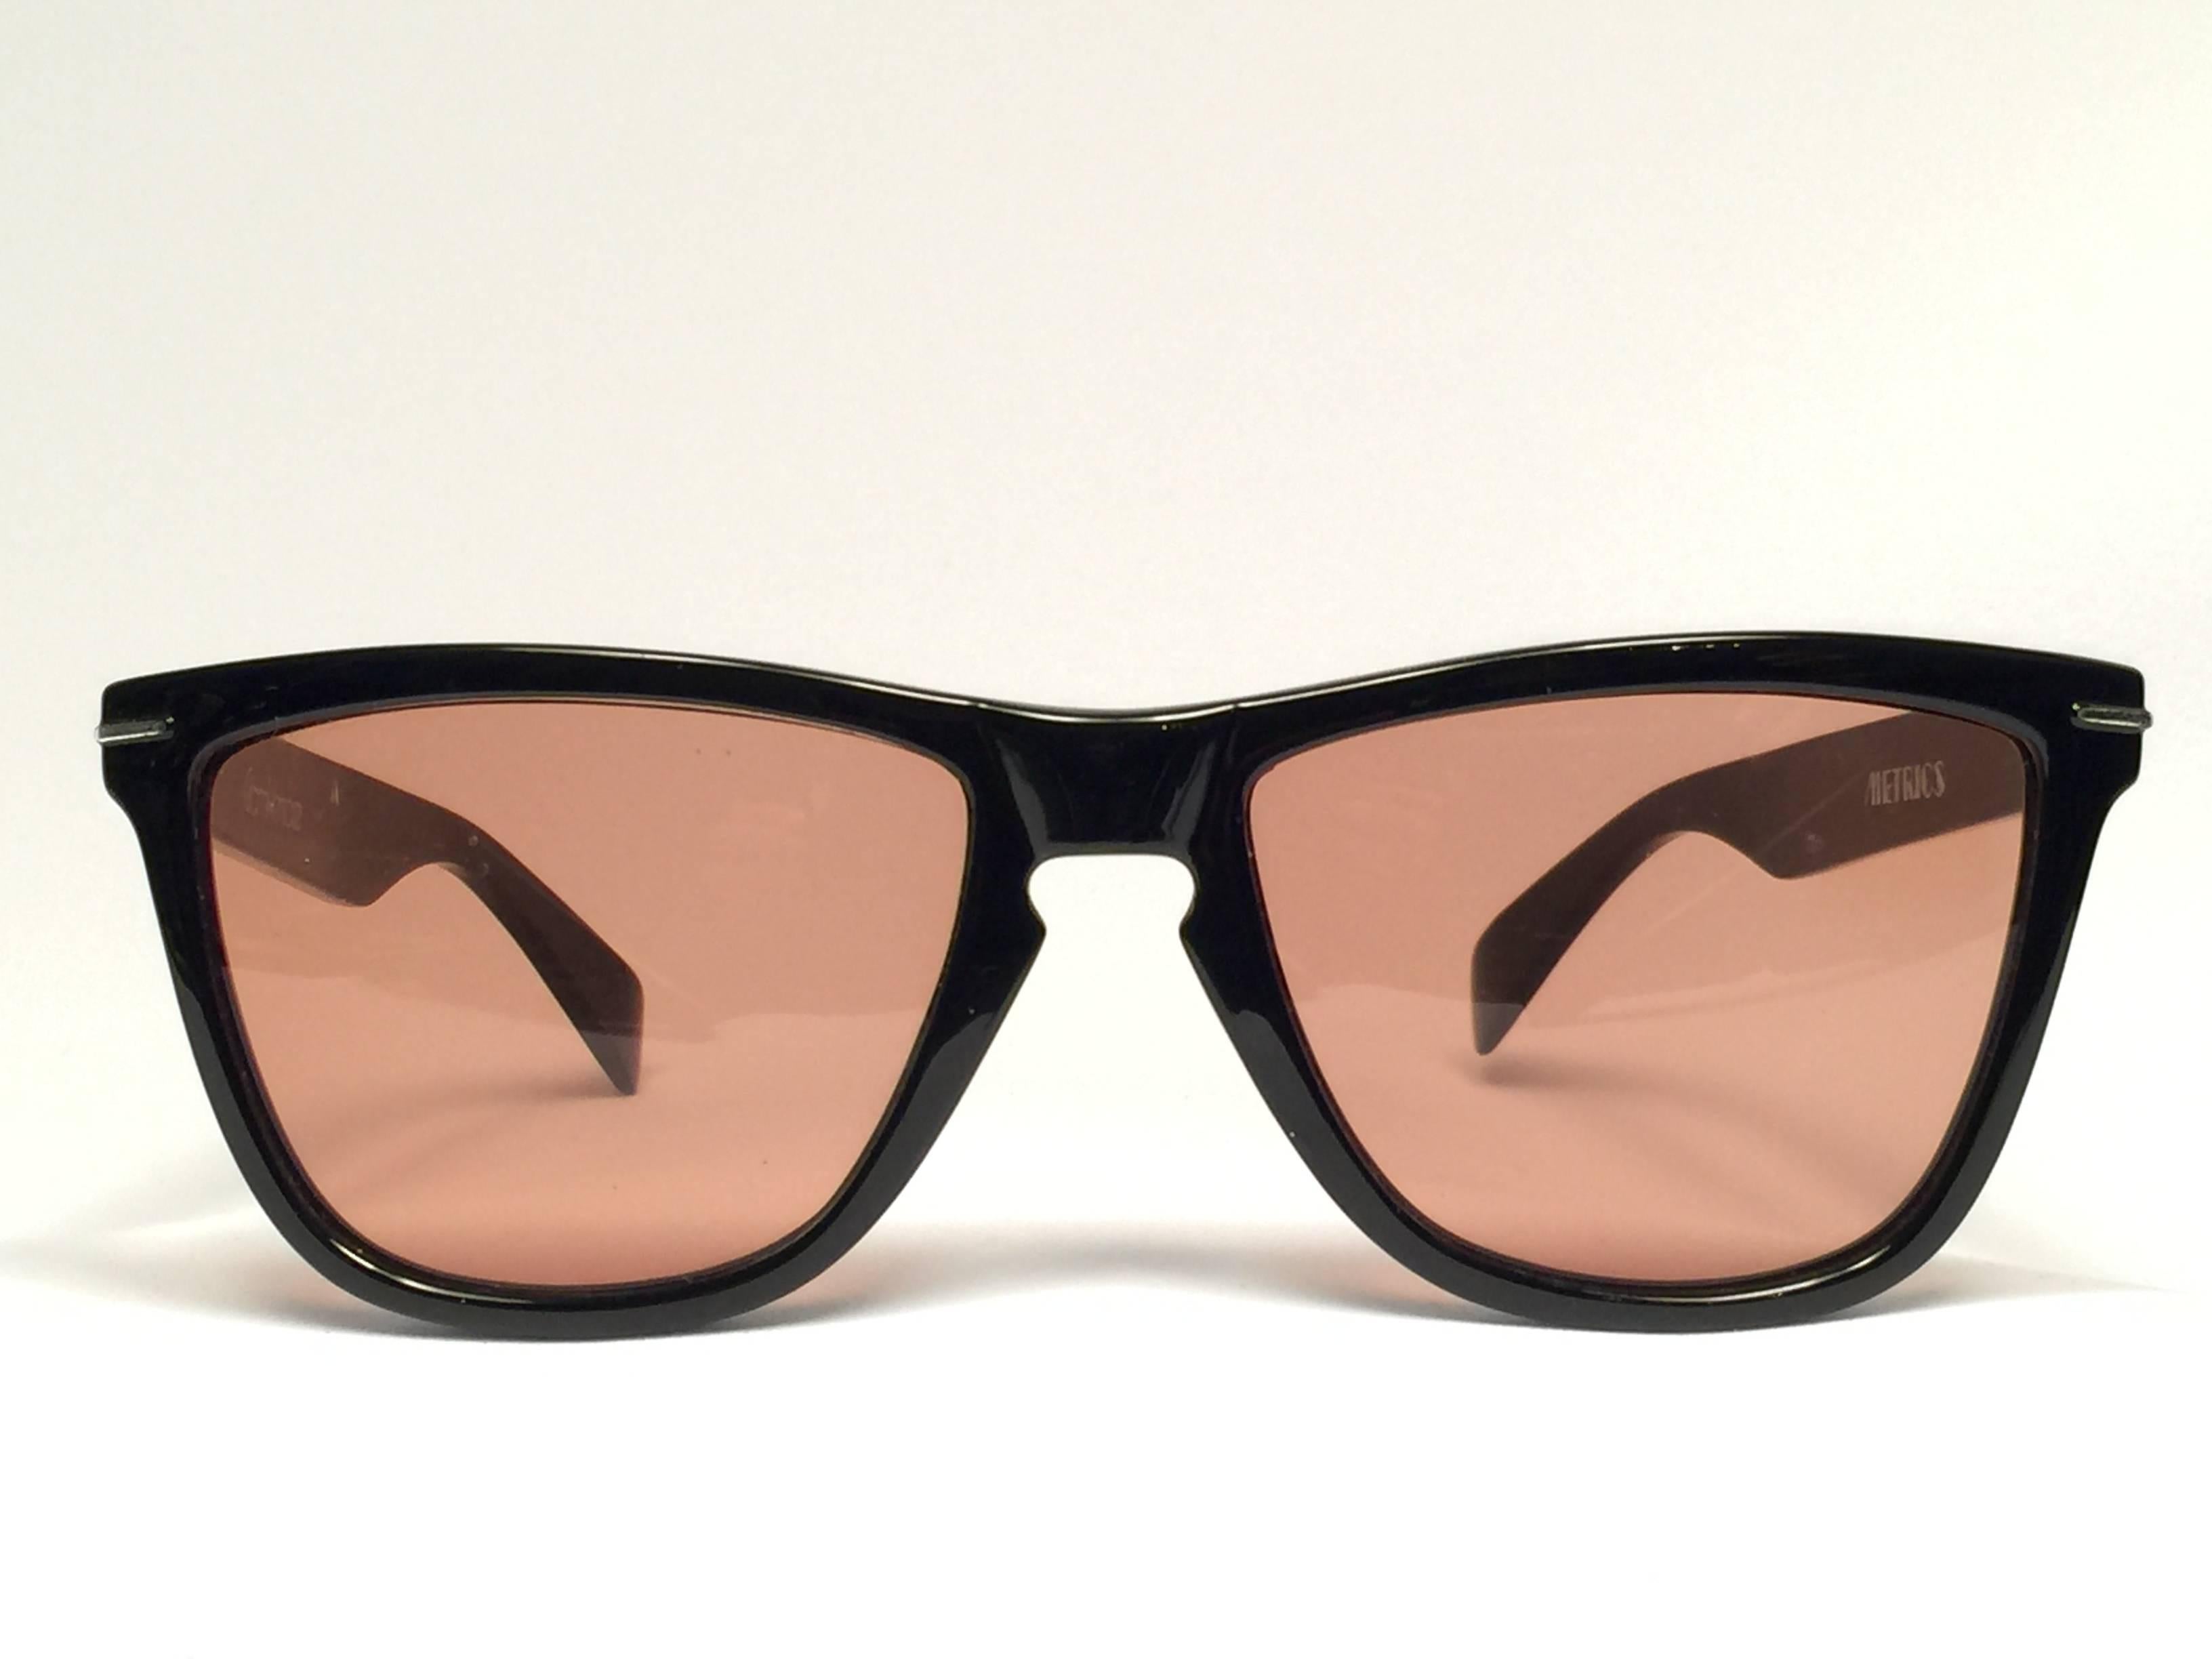 New Vintage Gianni Versace sleek black warfare style frame with medium brown lenses.

New never worn or displayed. This pair could show minor sign of wear due to storage.

Made in italy.